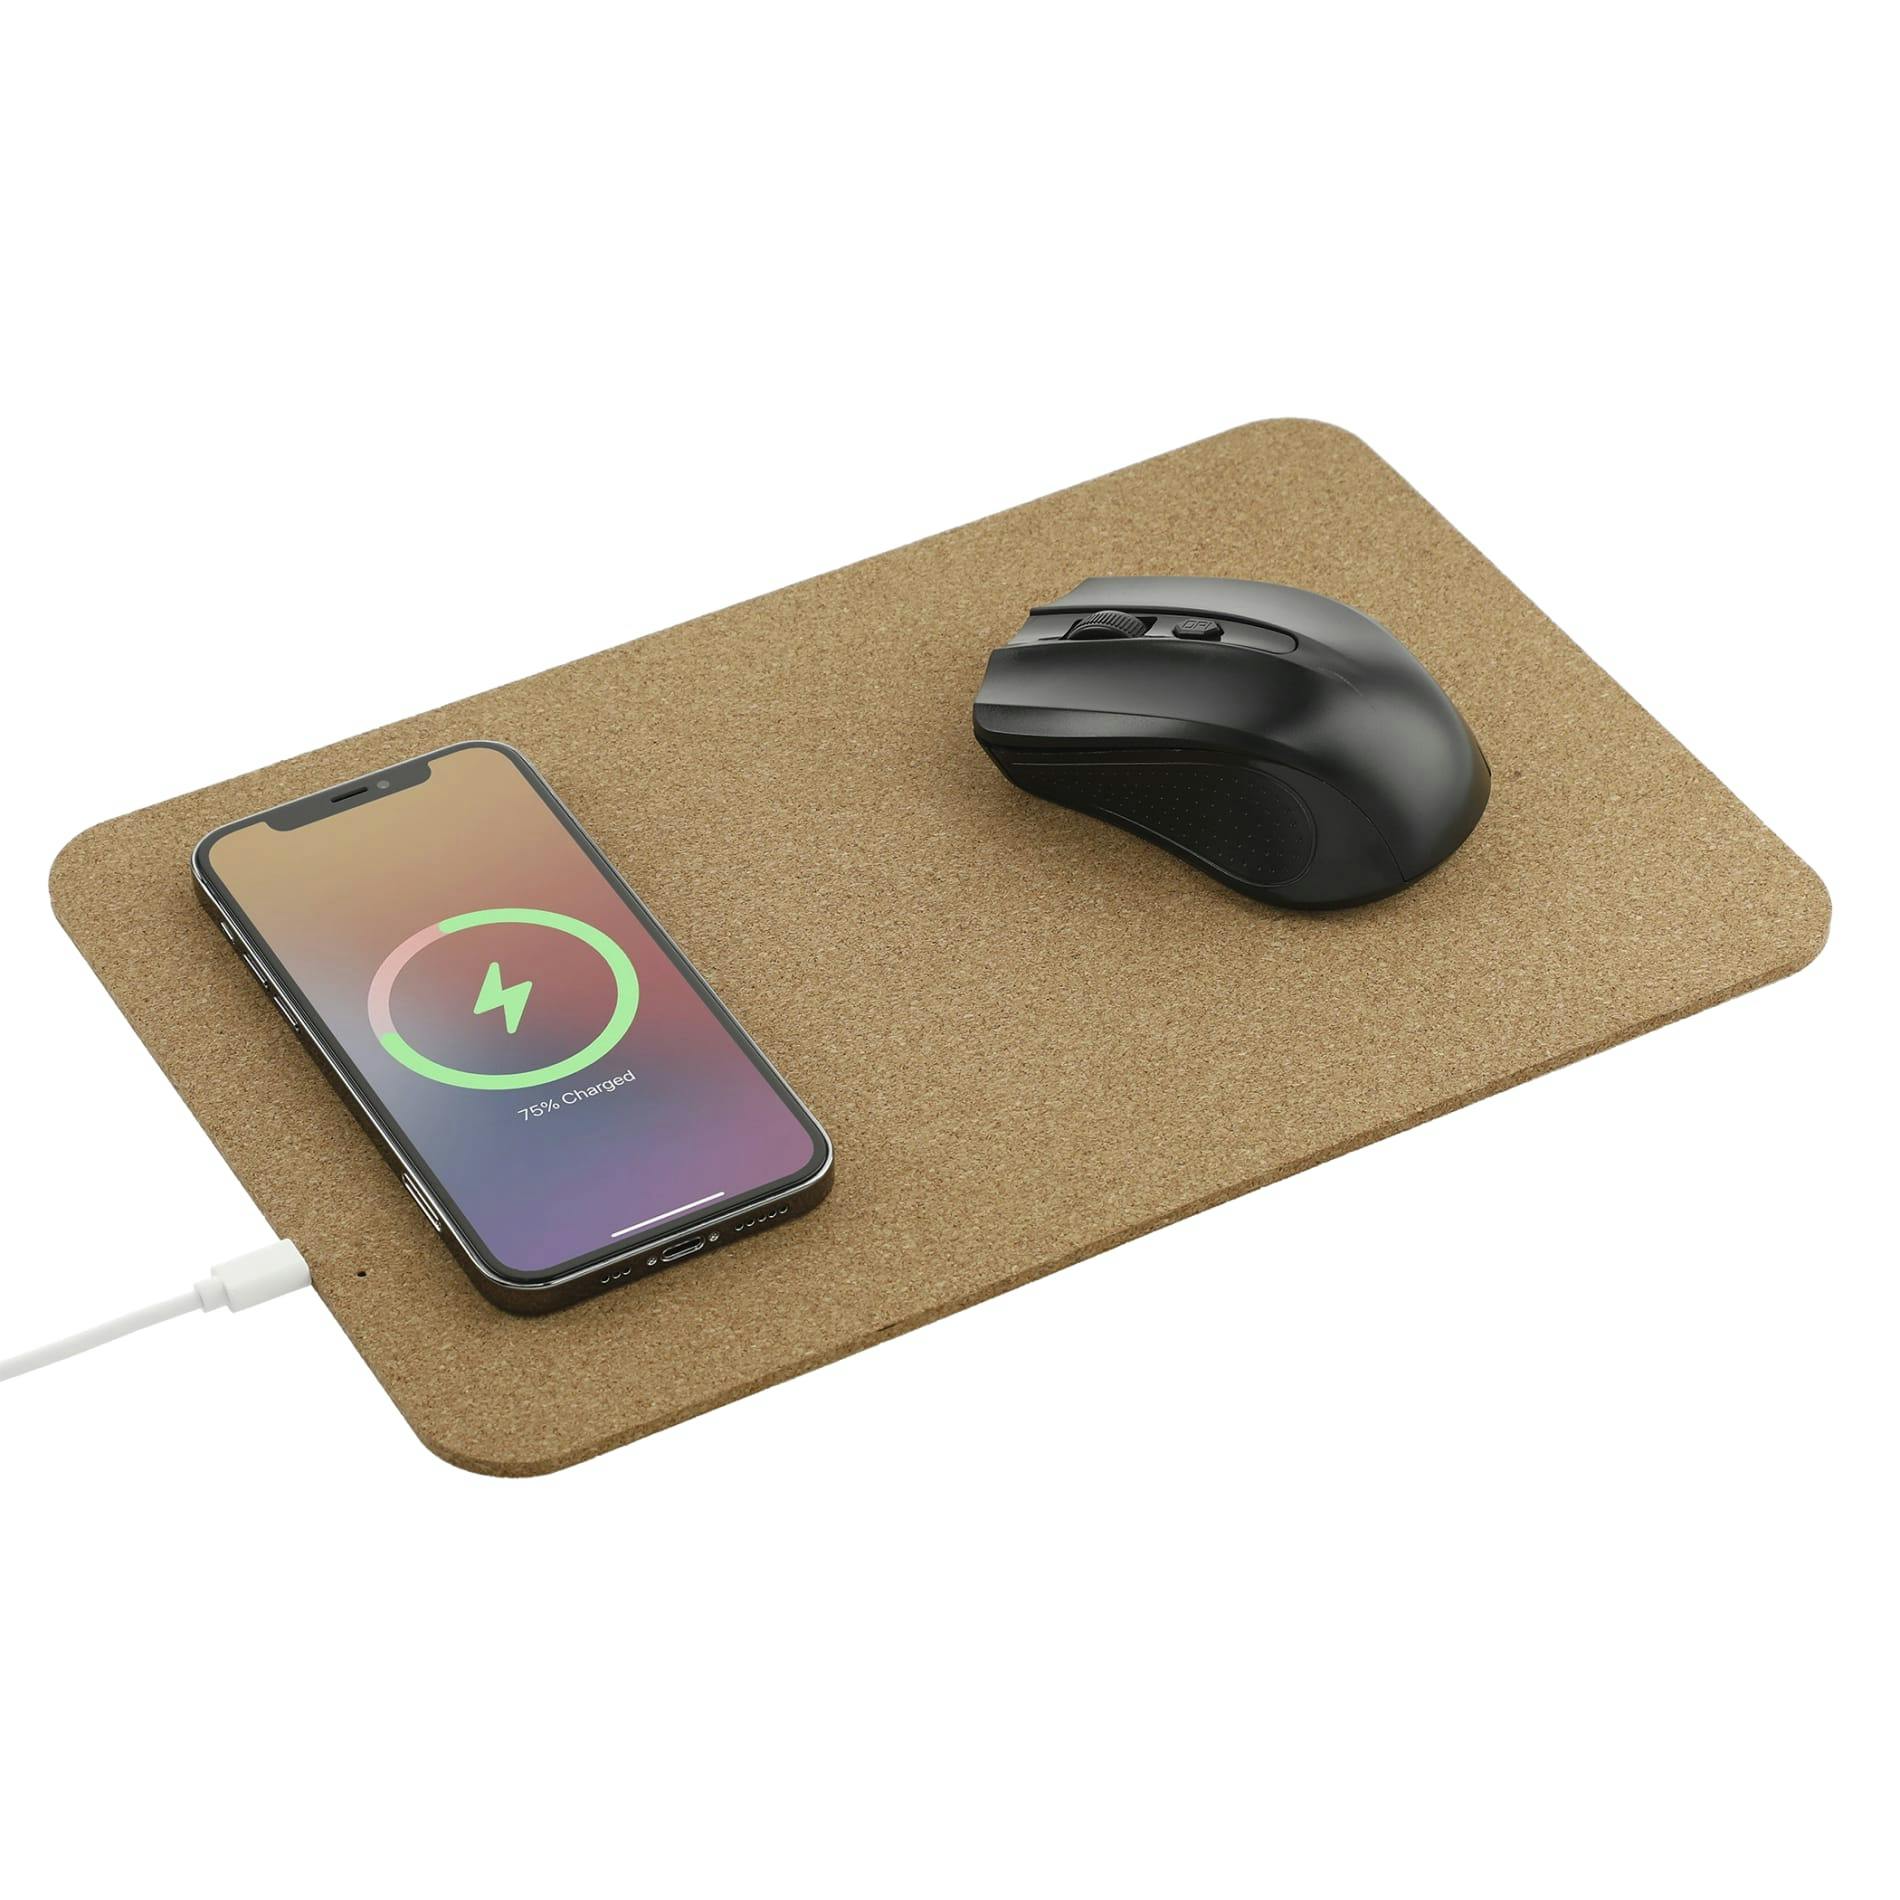 Cork Fast Wireless Charging Mouse Pad - additional Image 1